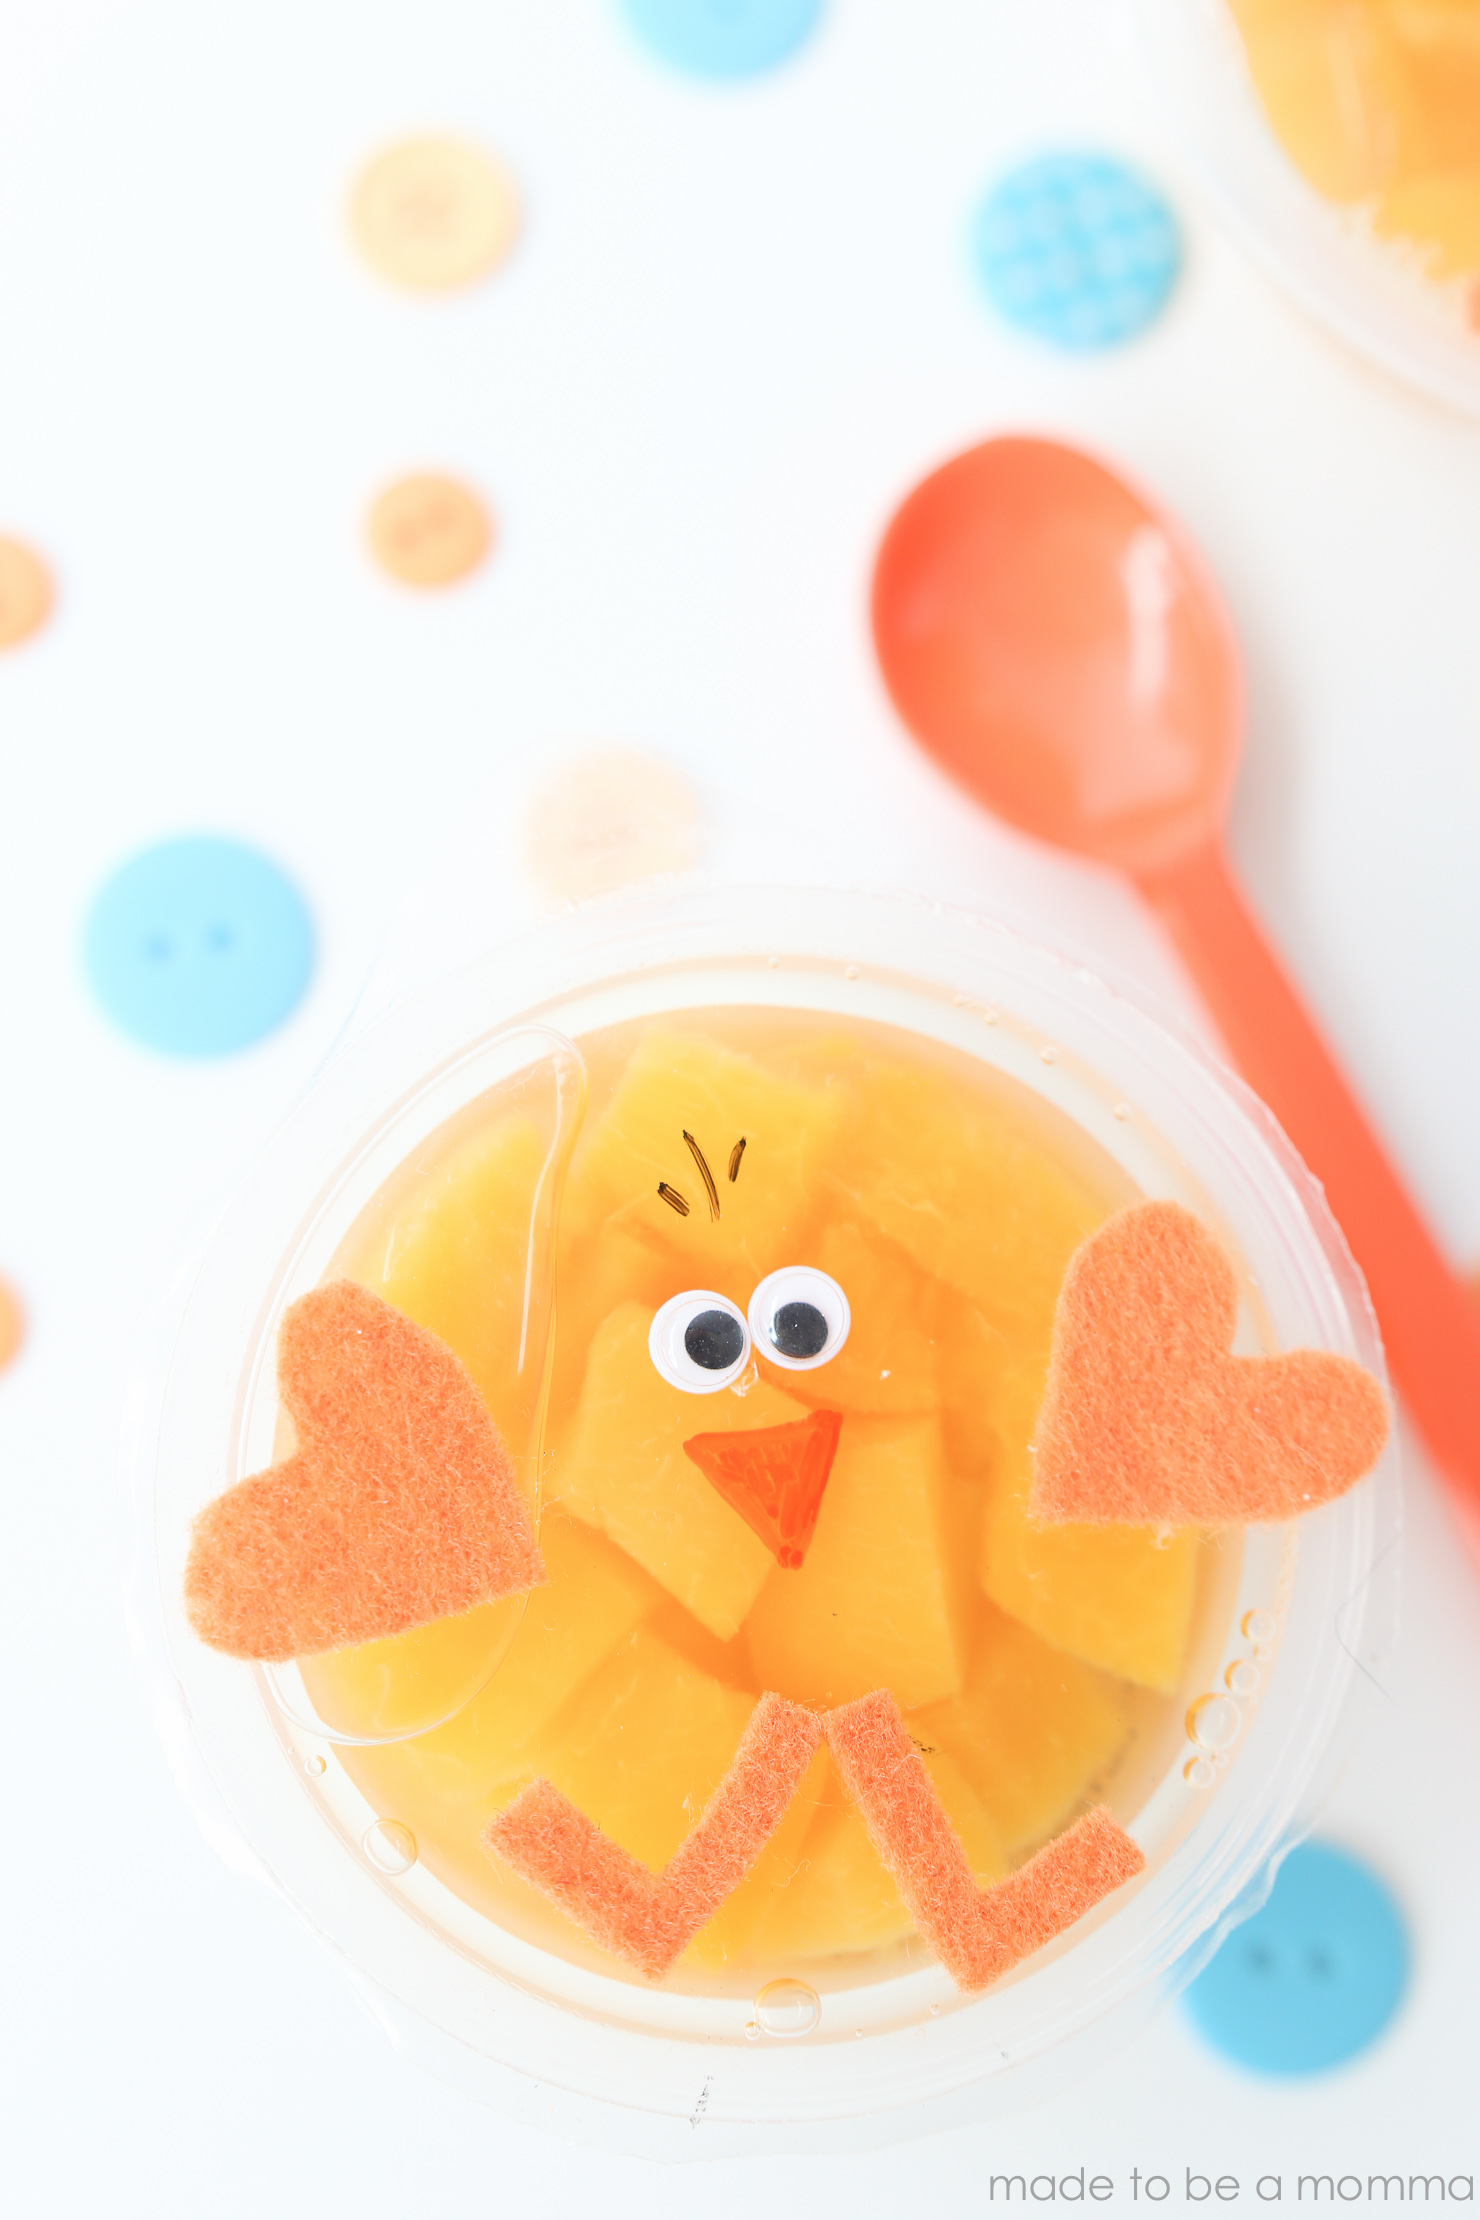 Baby Chick Fruit Cup: a fun spring idea for the kids to take in there lunch boxes or enjoy at home